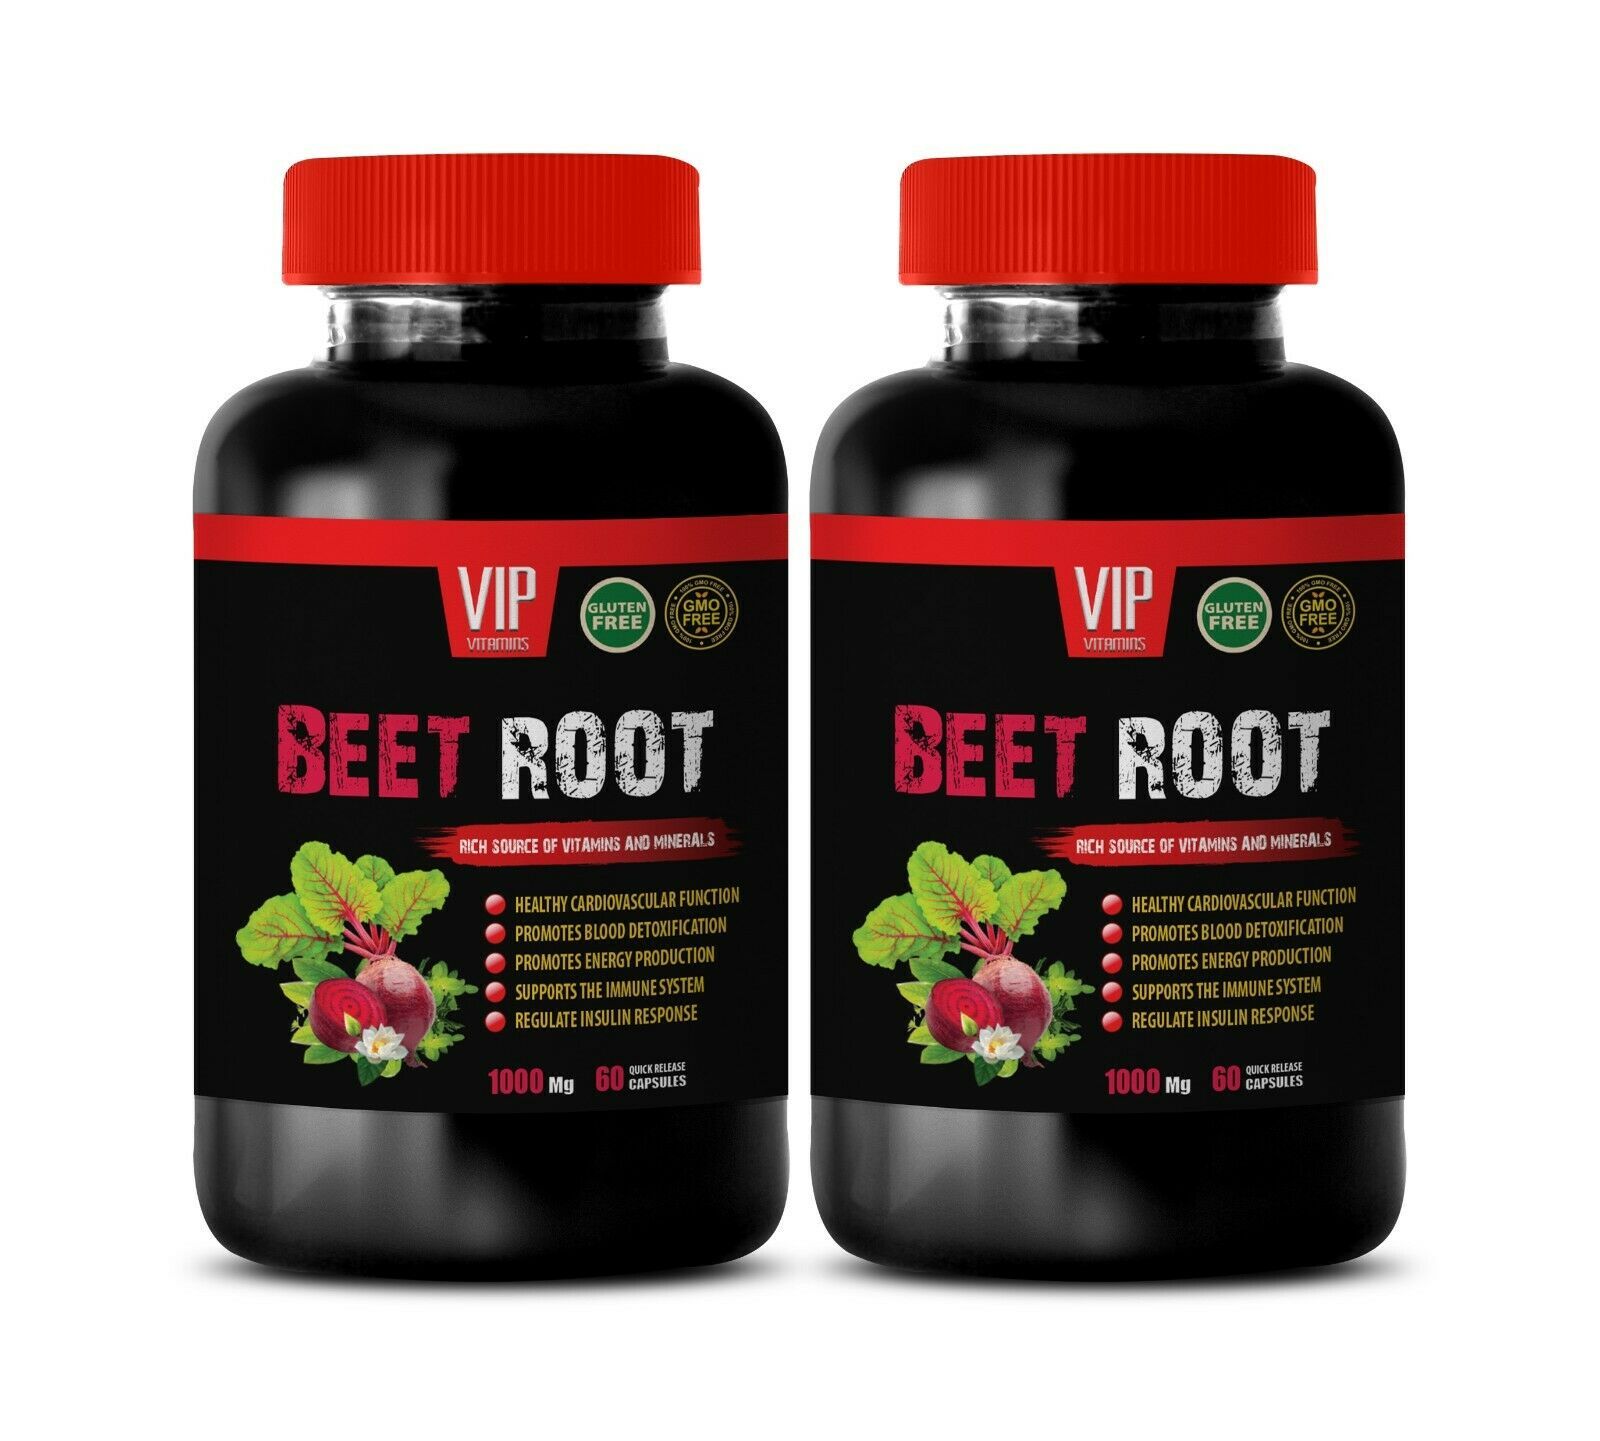 Primary image for anti inflammation diet - BEET ROOT - energy boost all natural 2 Bottles